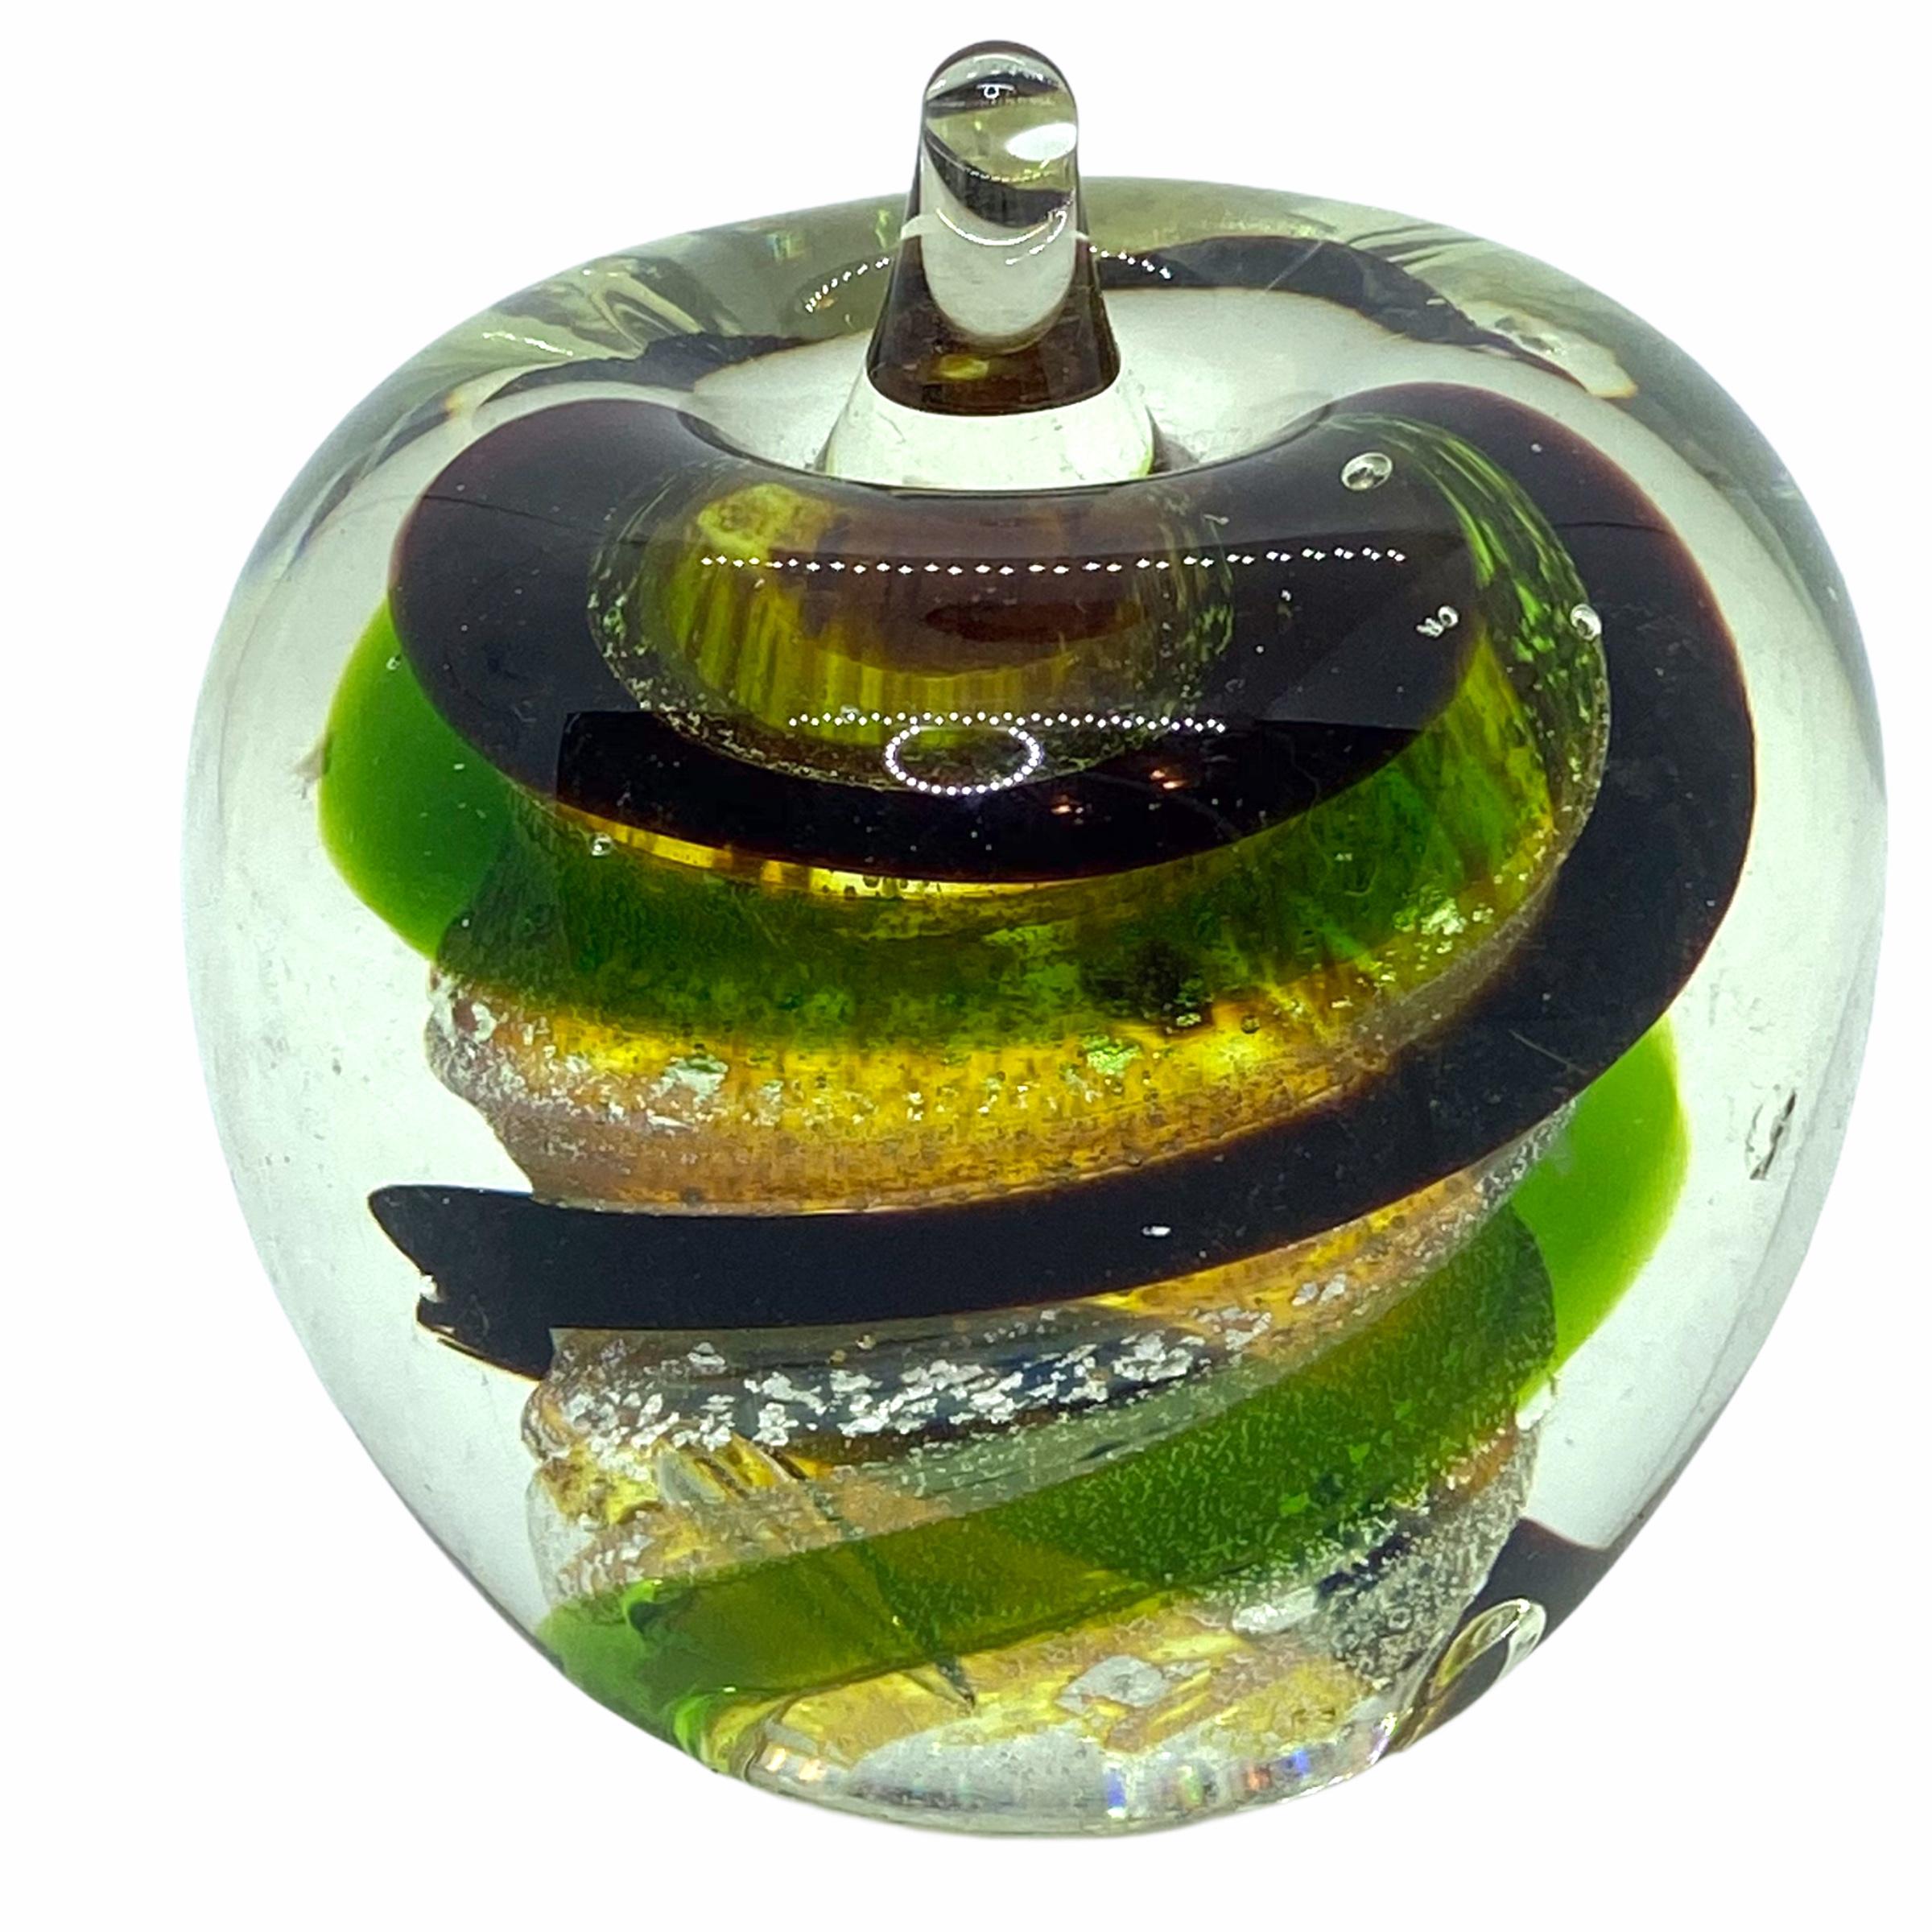 Beautiful Murano hand blown Italian art glass paper weight. In the shape of an apple, with colorful swirls inside. Colors are a green, silver, brown and clear. A beautiful nice addition to your desktop.